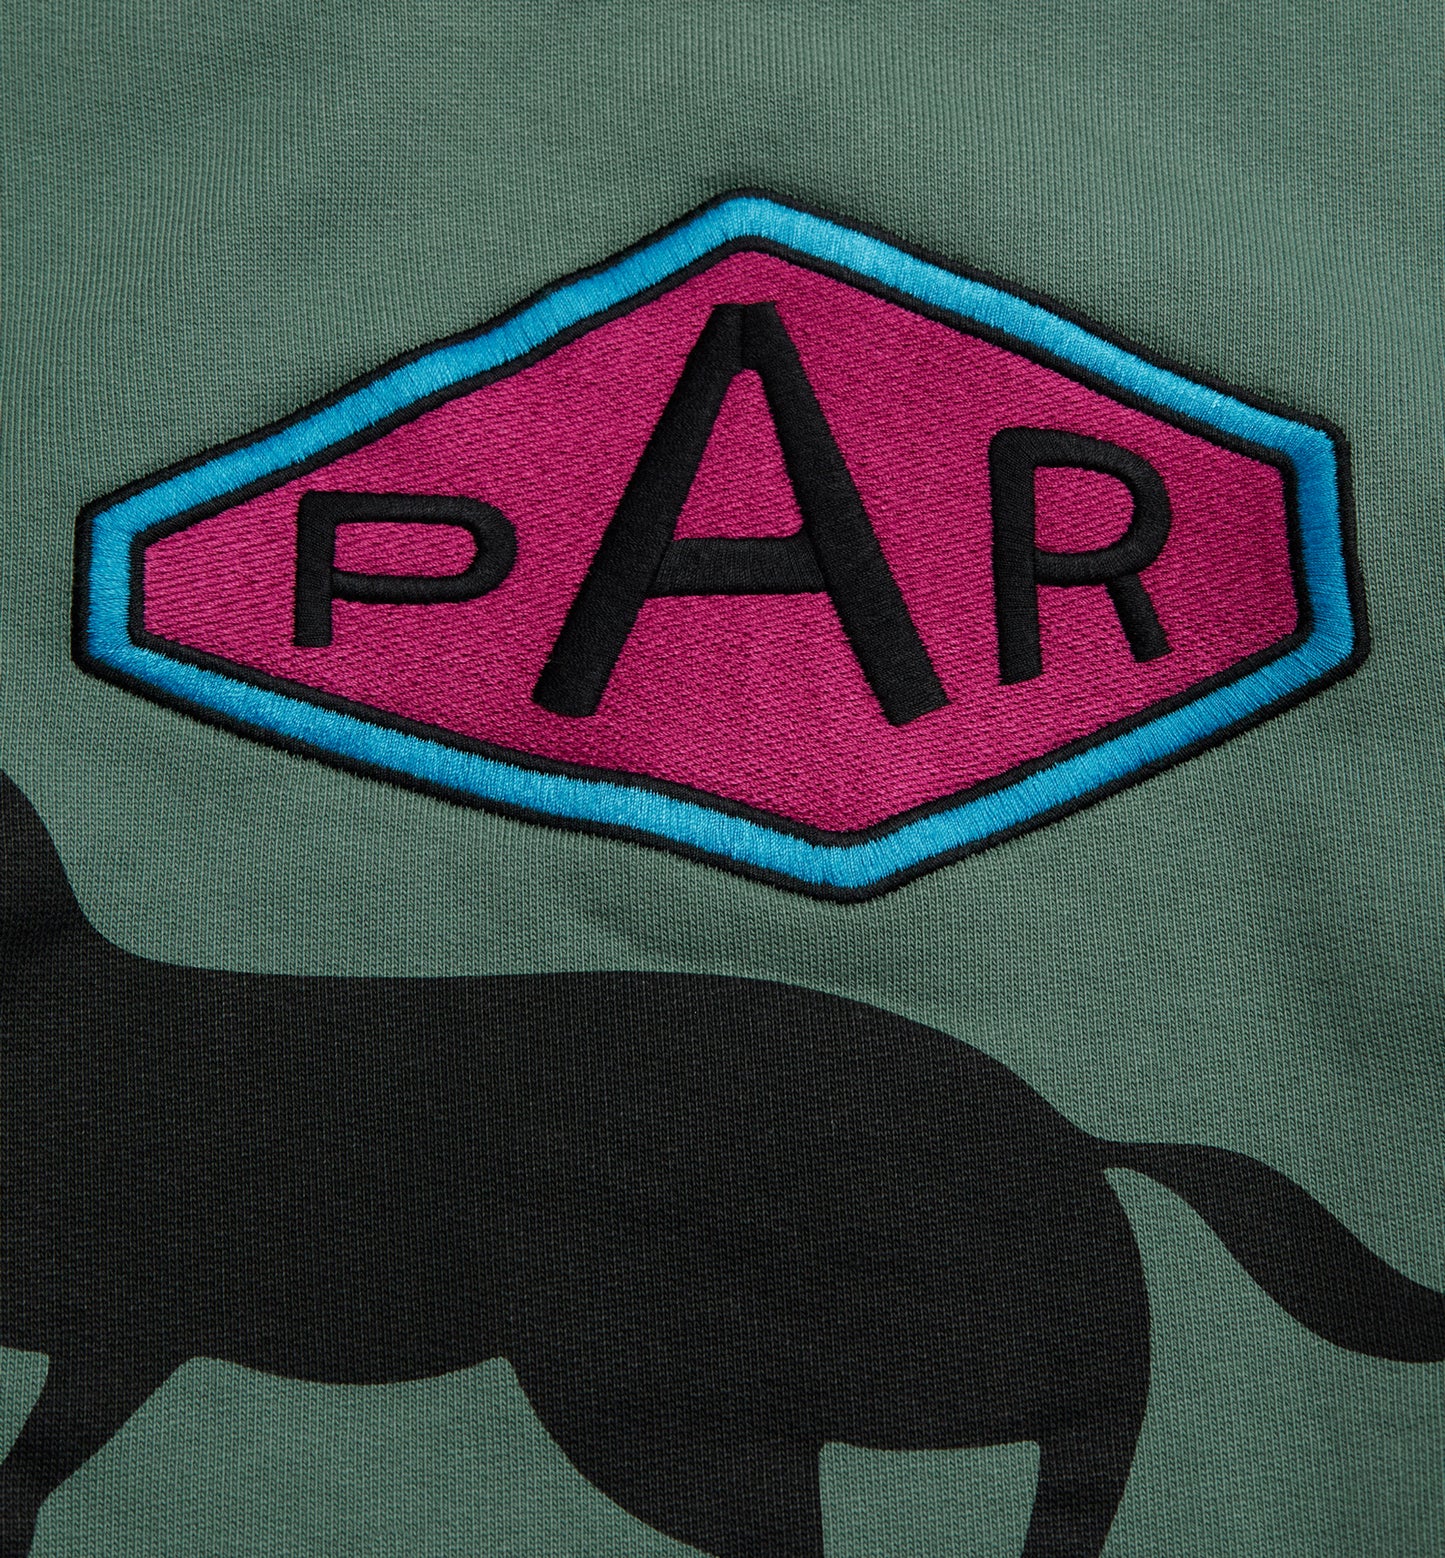 By Parra Snaked By A Horse Crewneck Sweater Pinegreen